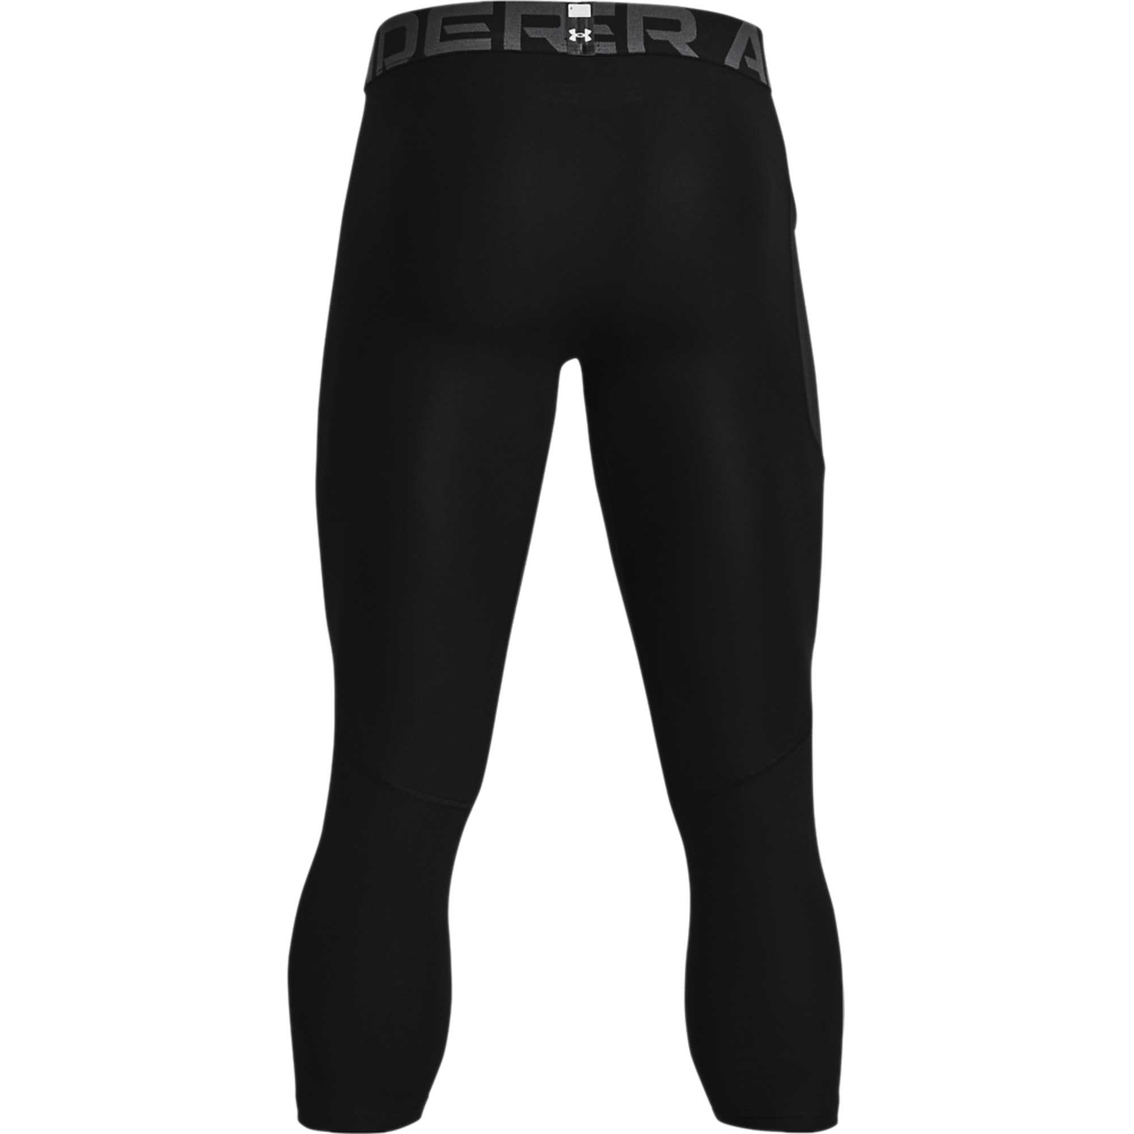 Under Armour Heat Gear 3/4 Leggings | Pants | Clothing & Accessories ...